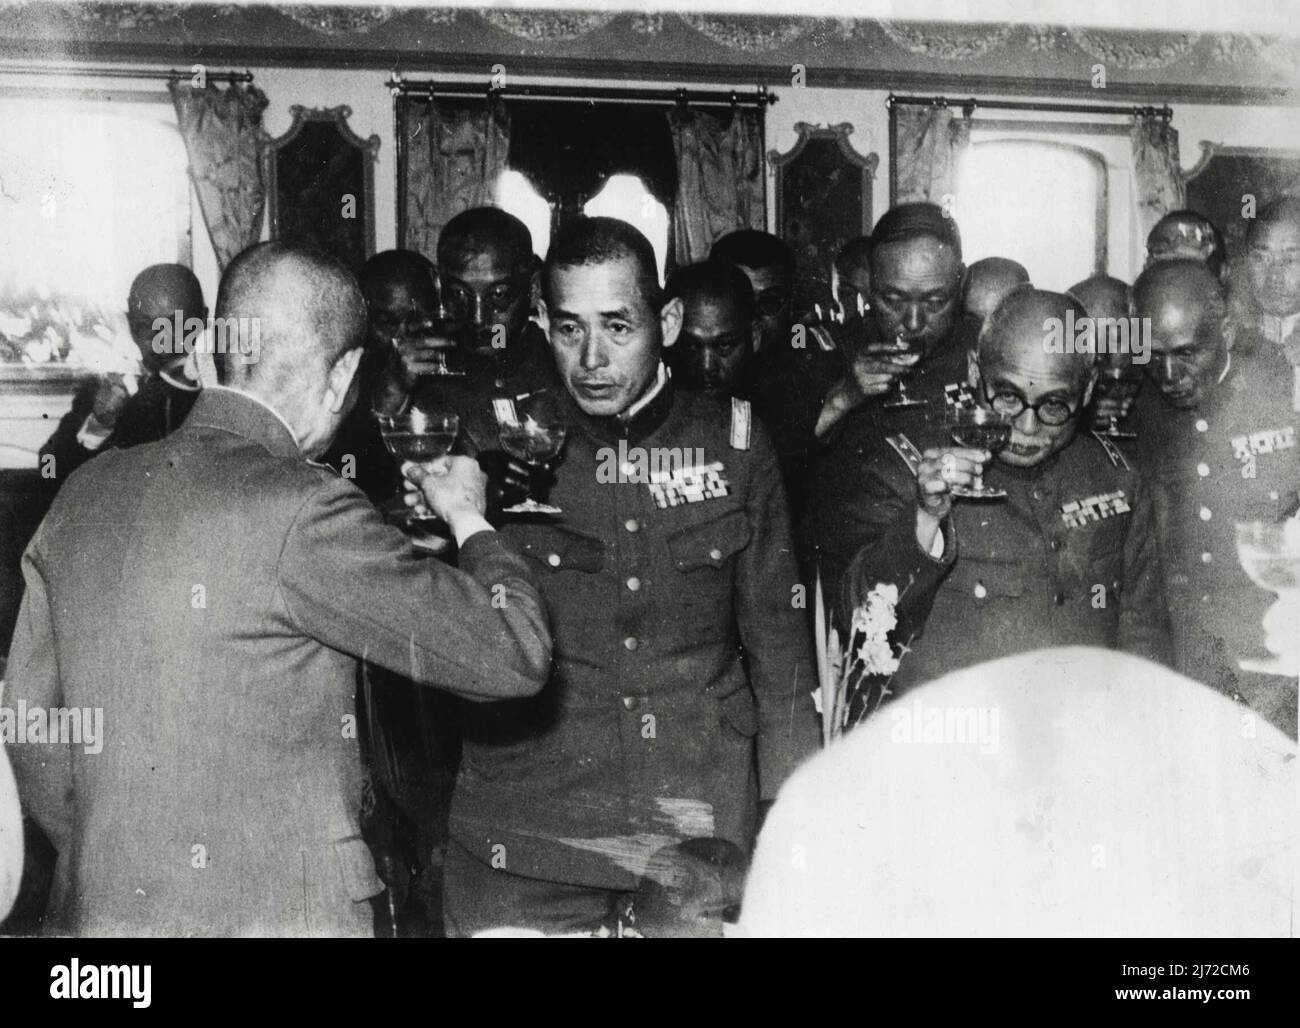 Retiring Japanese Army Chief Leaves Shanghai -- Board the Japanese Military Transport on which General Matsui, former Commander-In-Chief of the Japanese Forces Left Shanghai for Japan. Japanese officers Are Seen Drinking a Farewell toast to Japan's 'Little Napoleon'. General Shunroku Hata, The New Commander-In-Chief (facing camera) is seen Toasting General Iwane Matsui (back to Camera). March 23, 1938. (Photo by keystone). Stock Photo